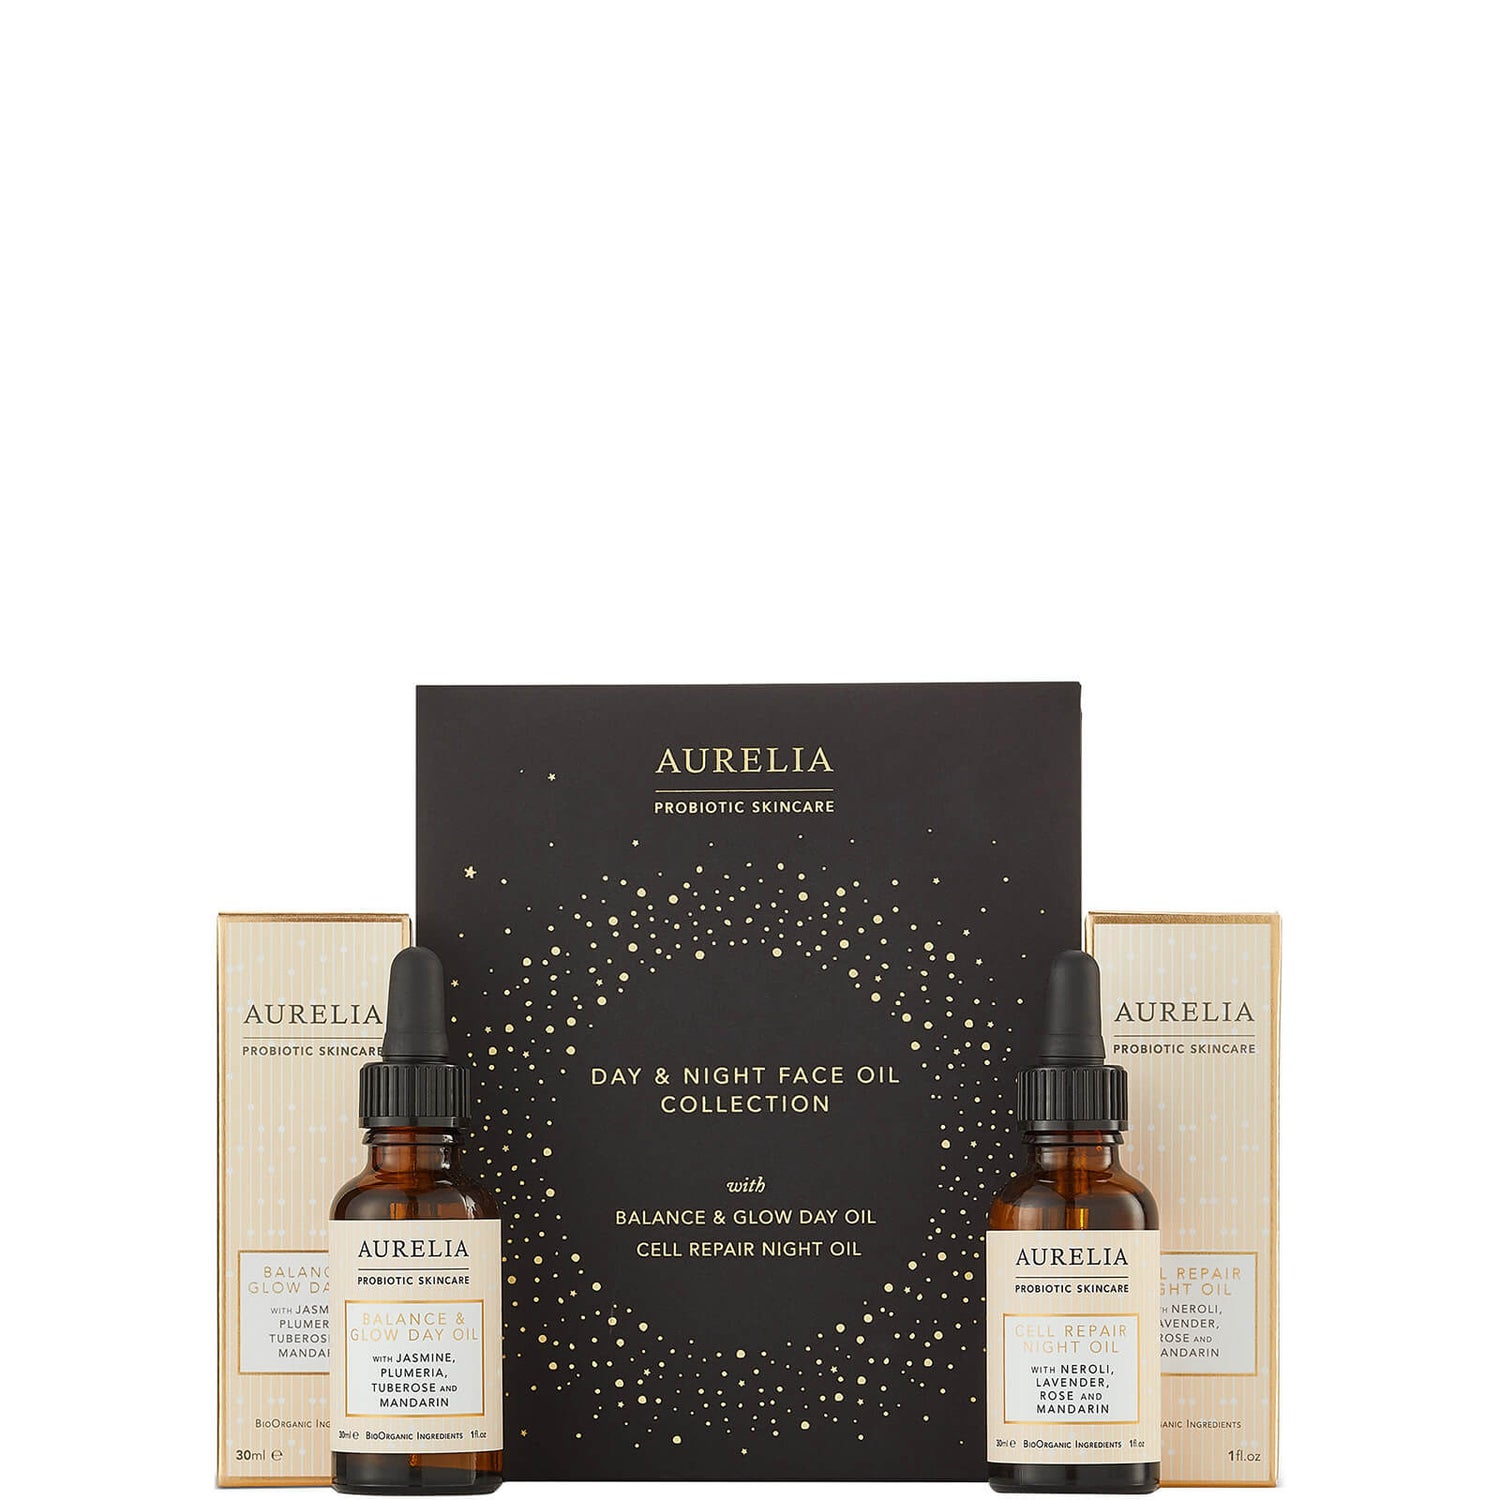 Aurelia Probiotic Skincare Day and Night Oil Collection 60ml (Worth $140.00)